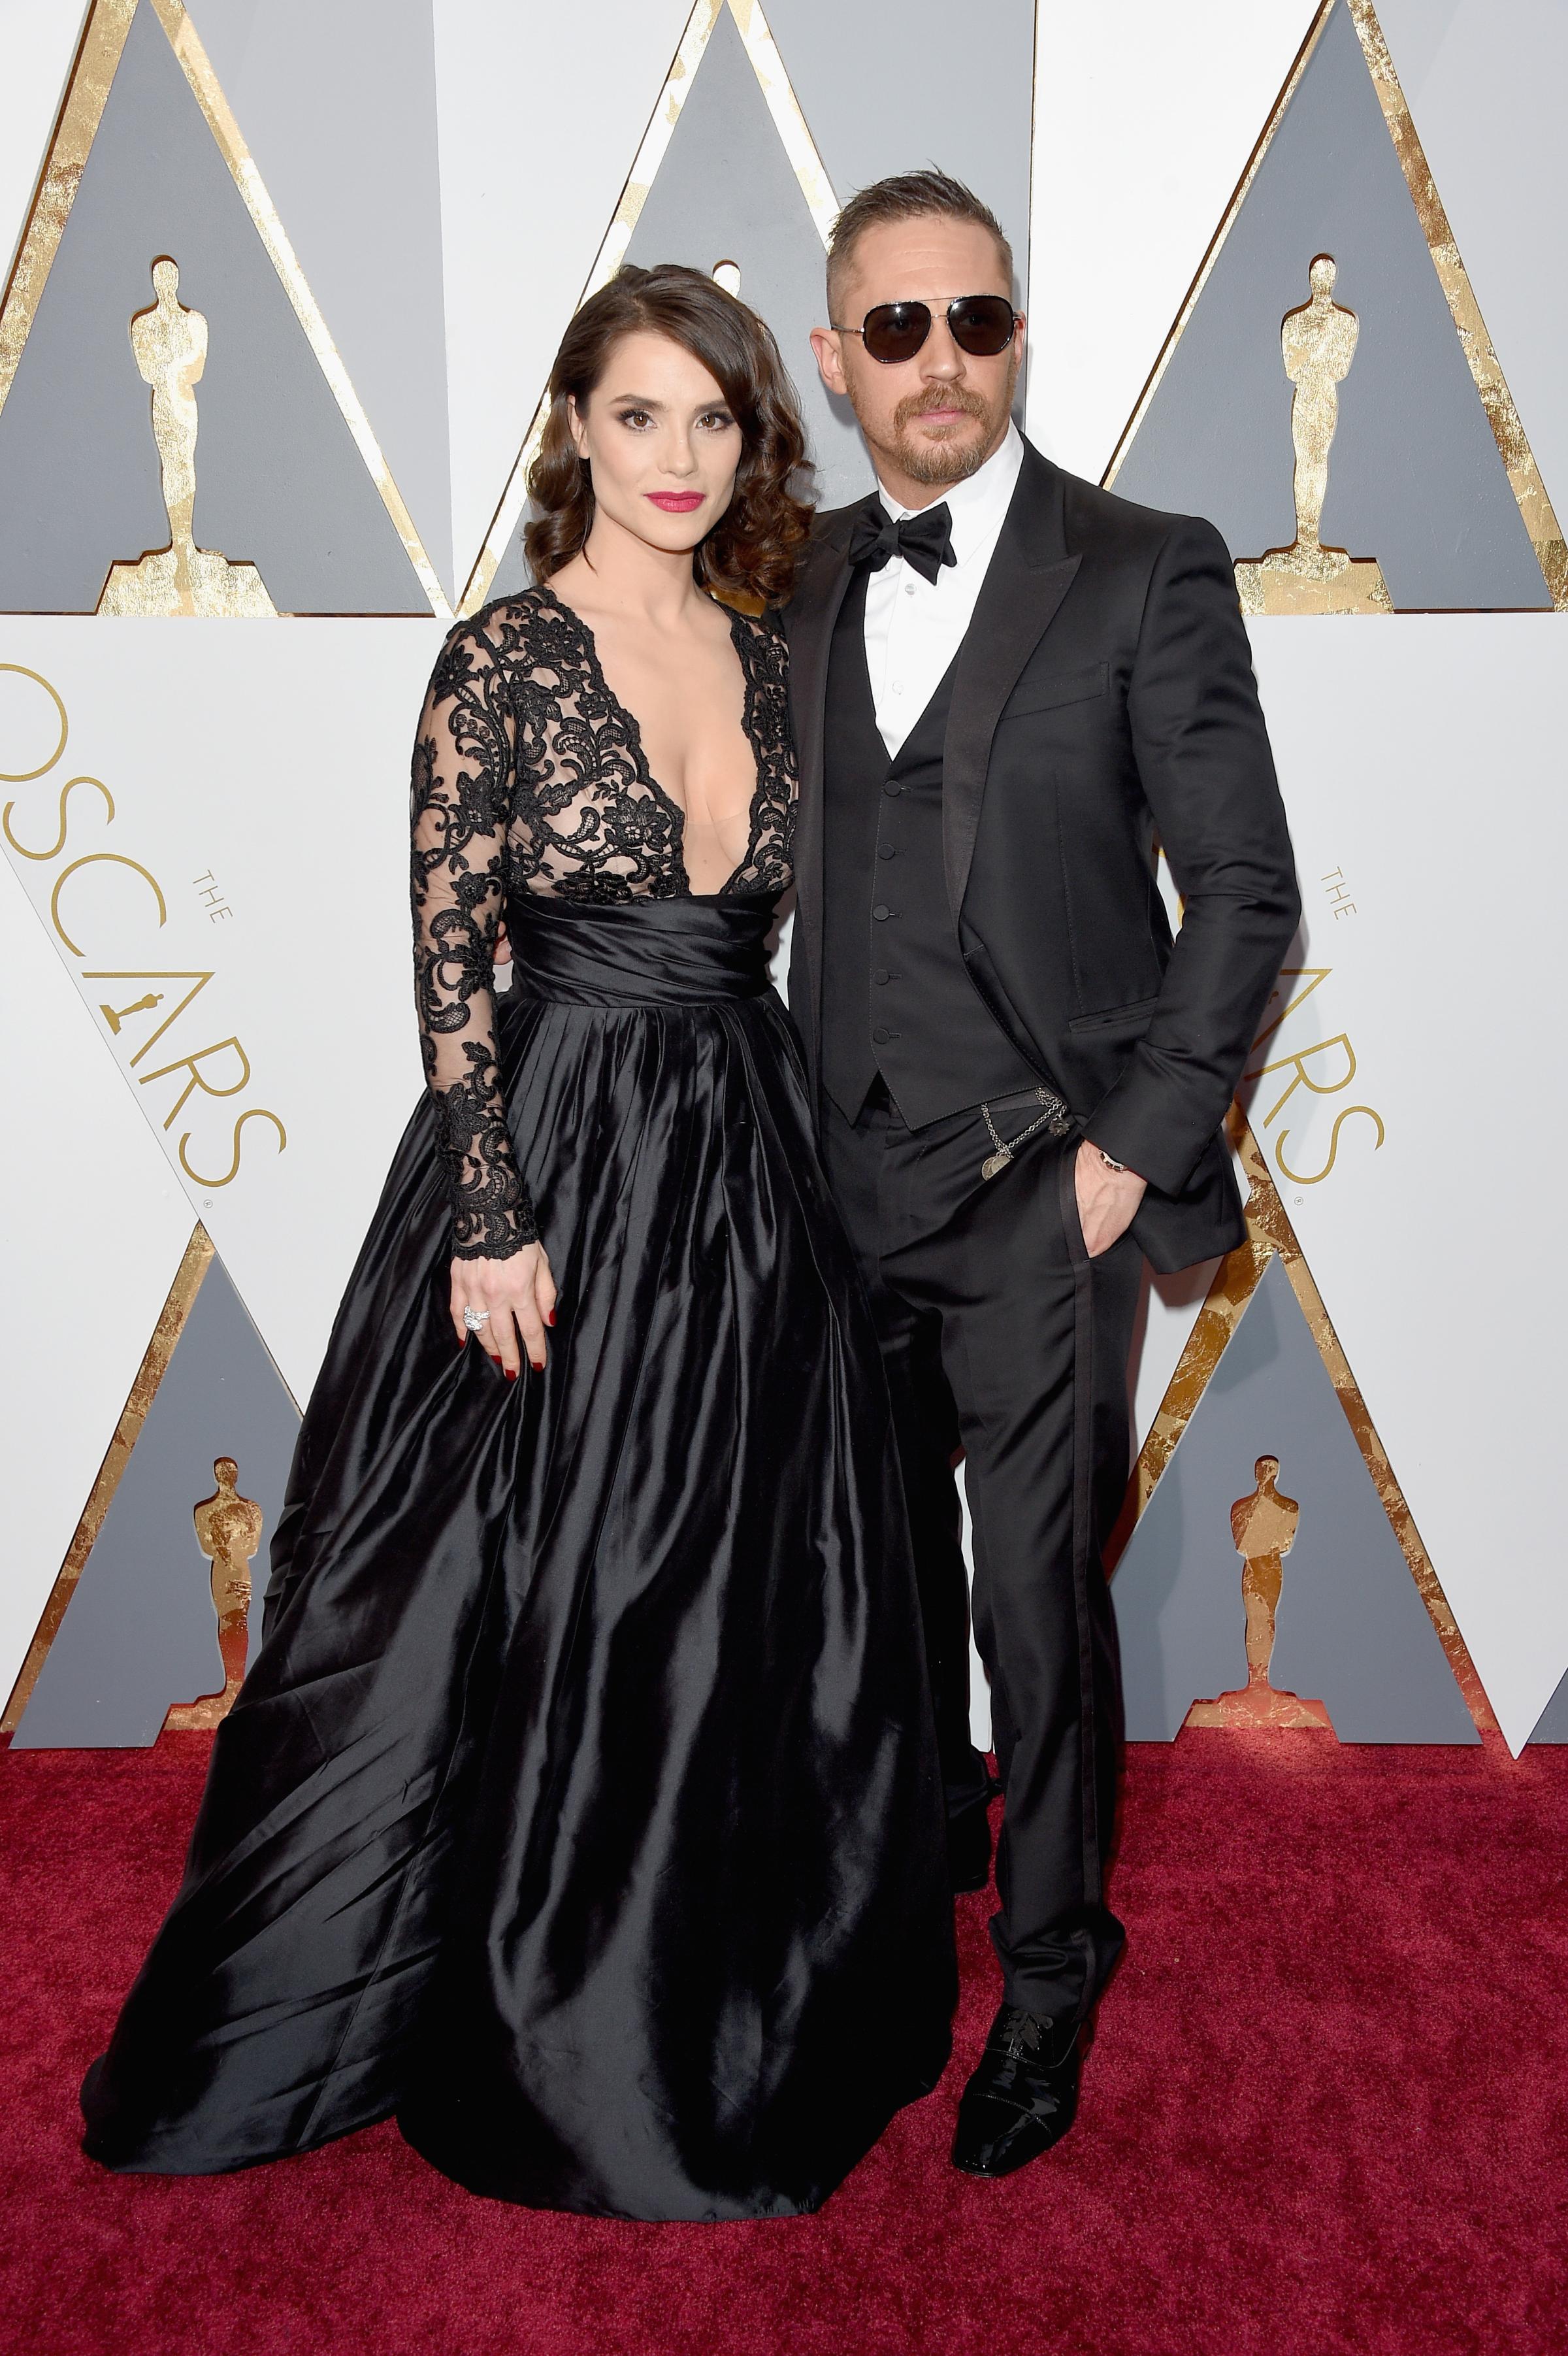 Charlotte Riley and Tom Hardy attend the 88th Annual Academy Awards on Feb. 28, 2016 in Hollywood, Calif.